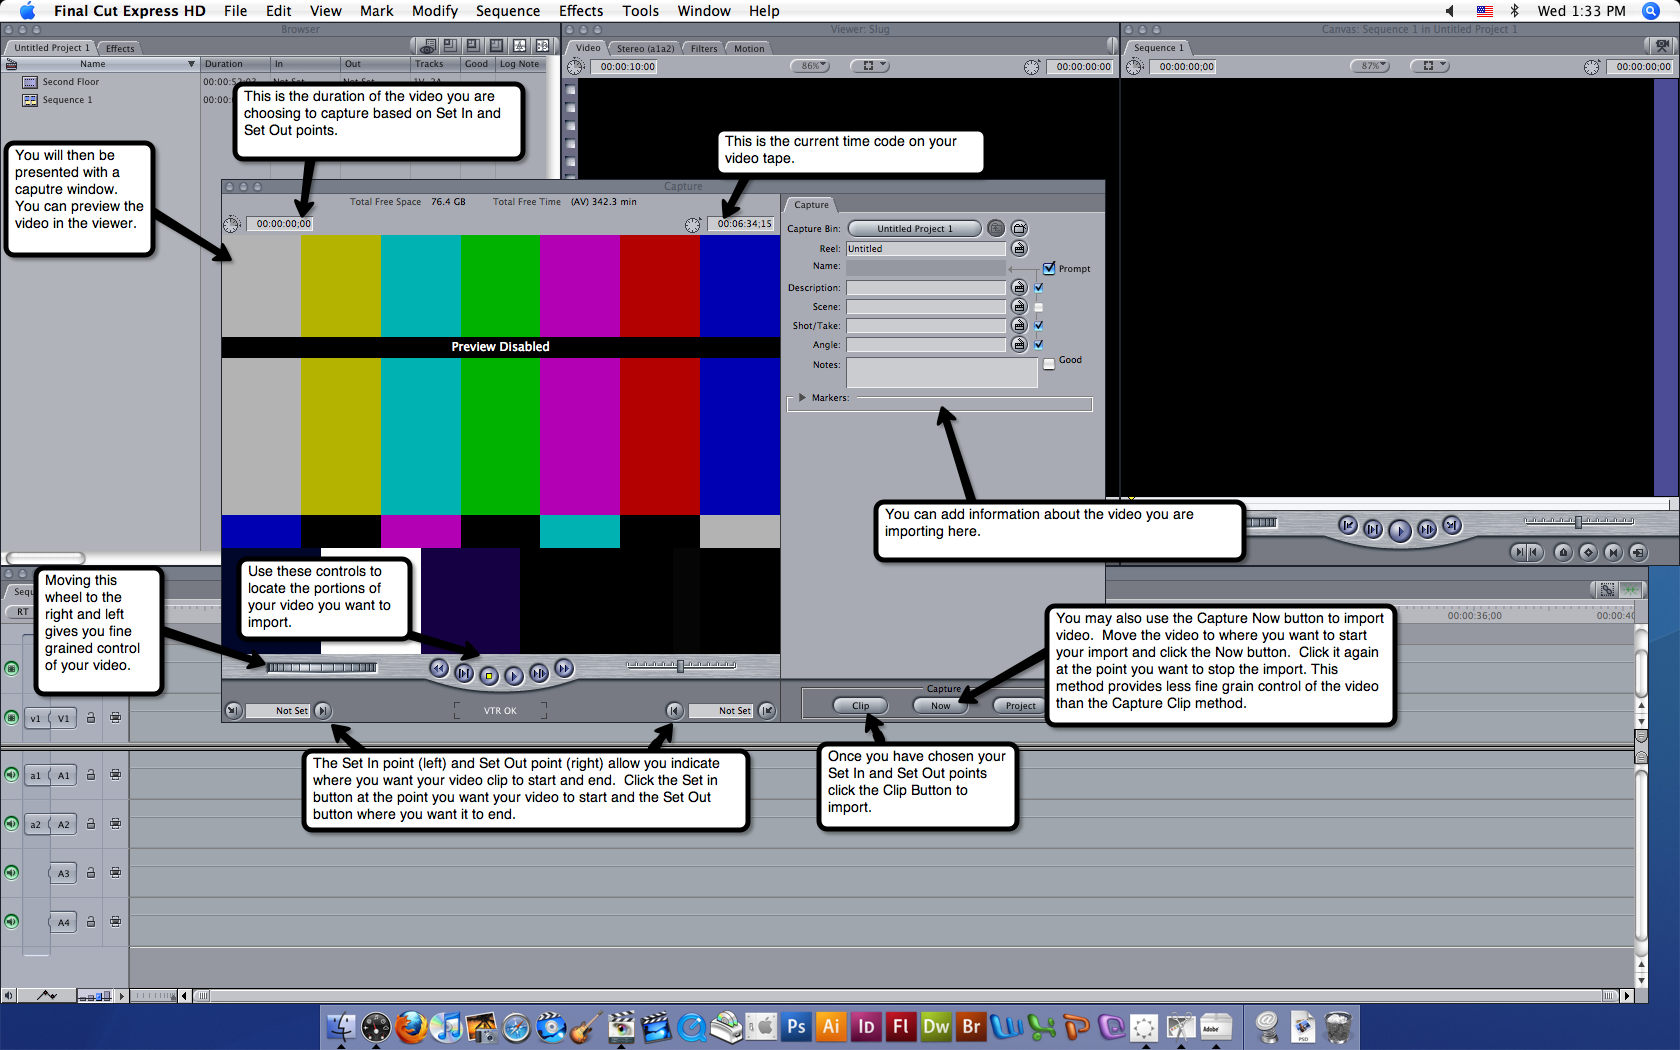 Visual guide to importing video into Final Express HD step 2.